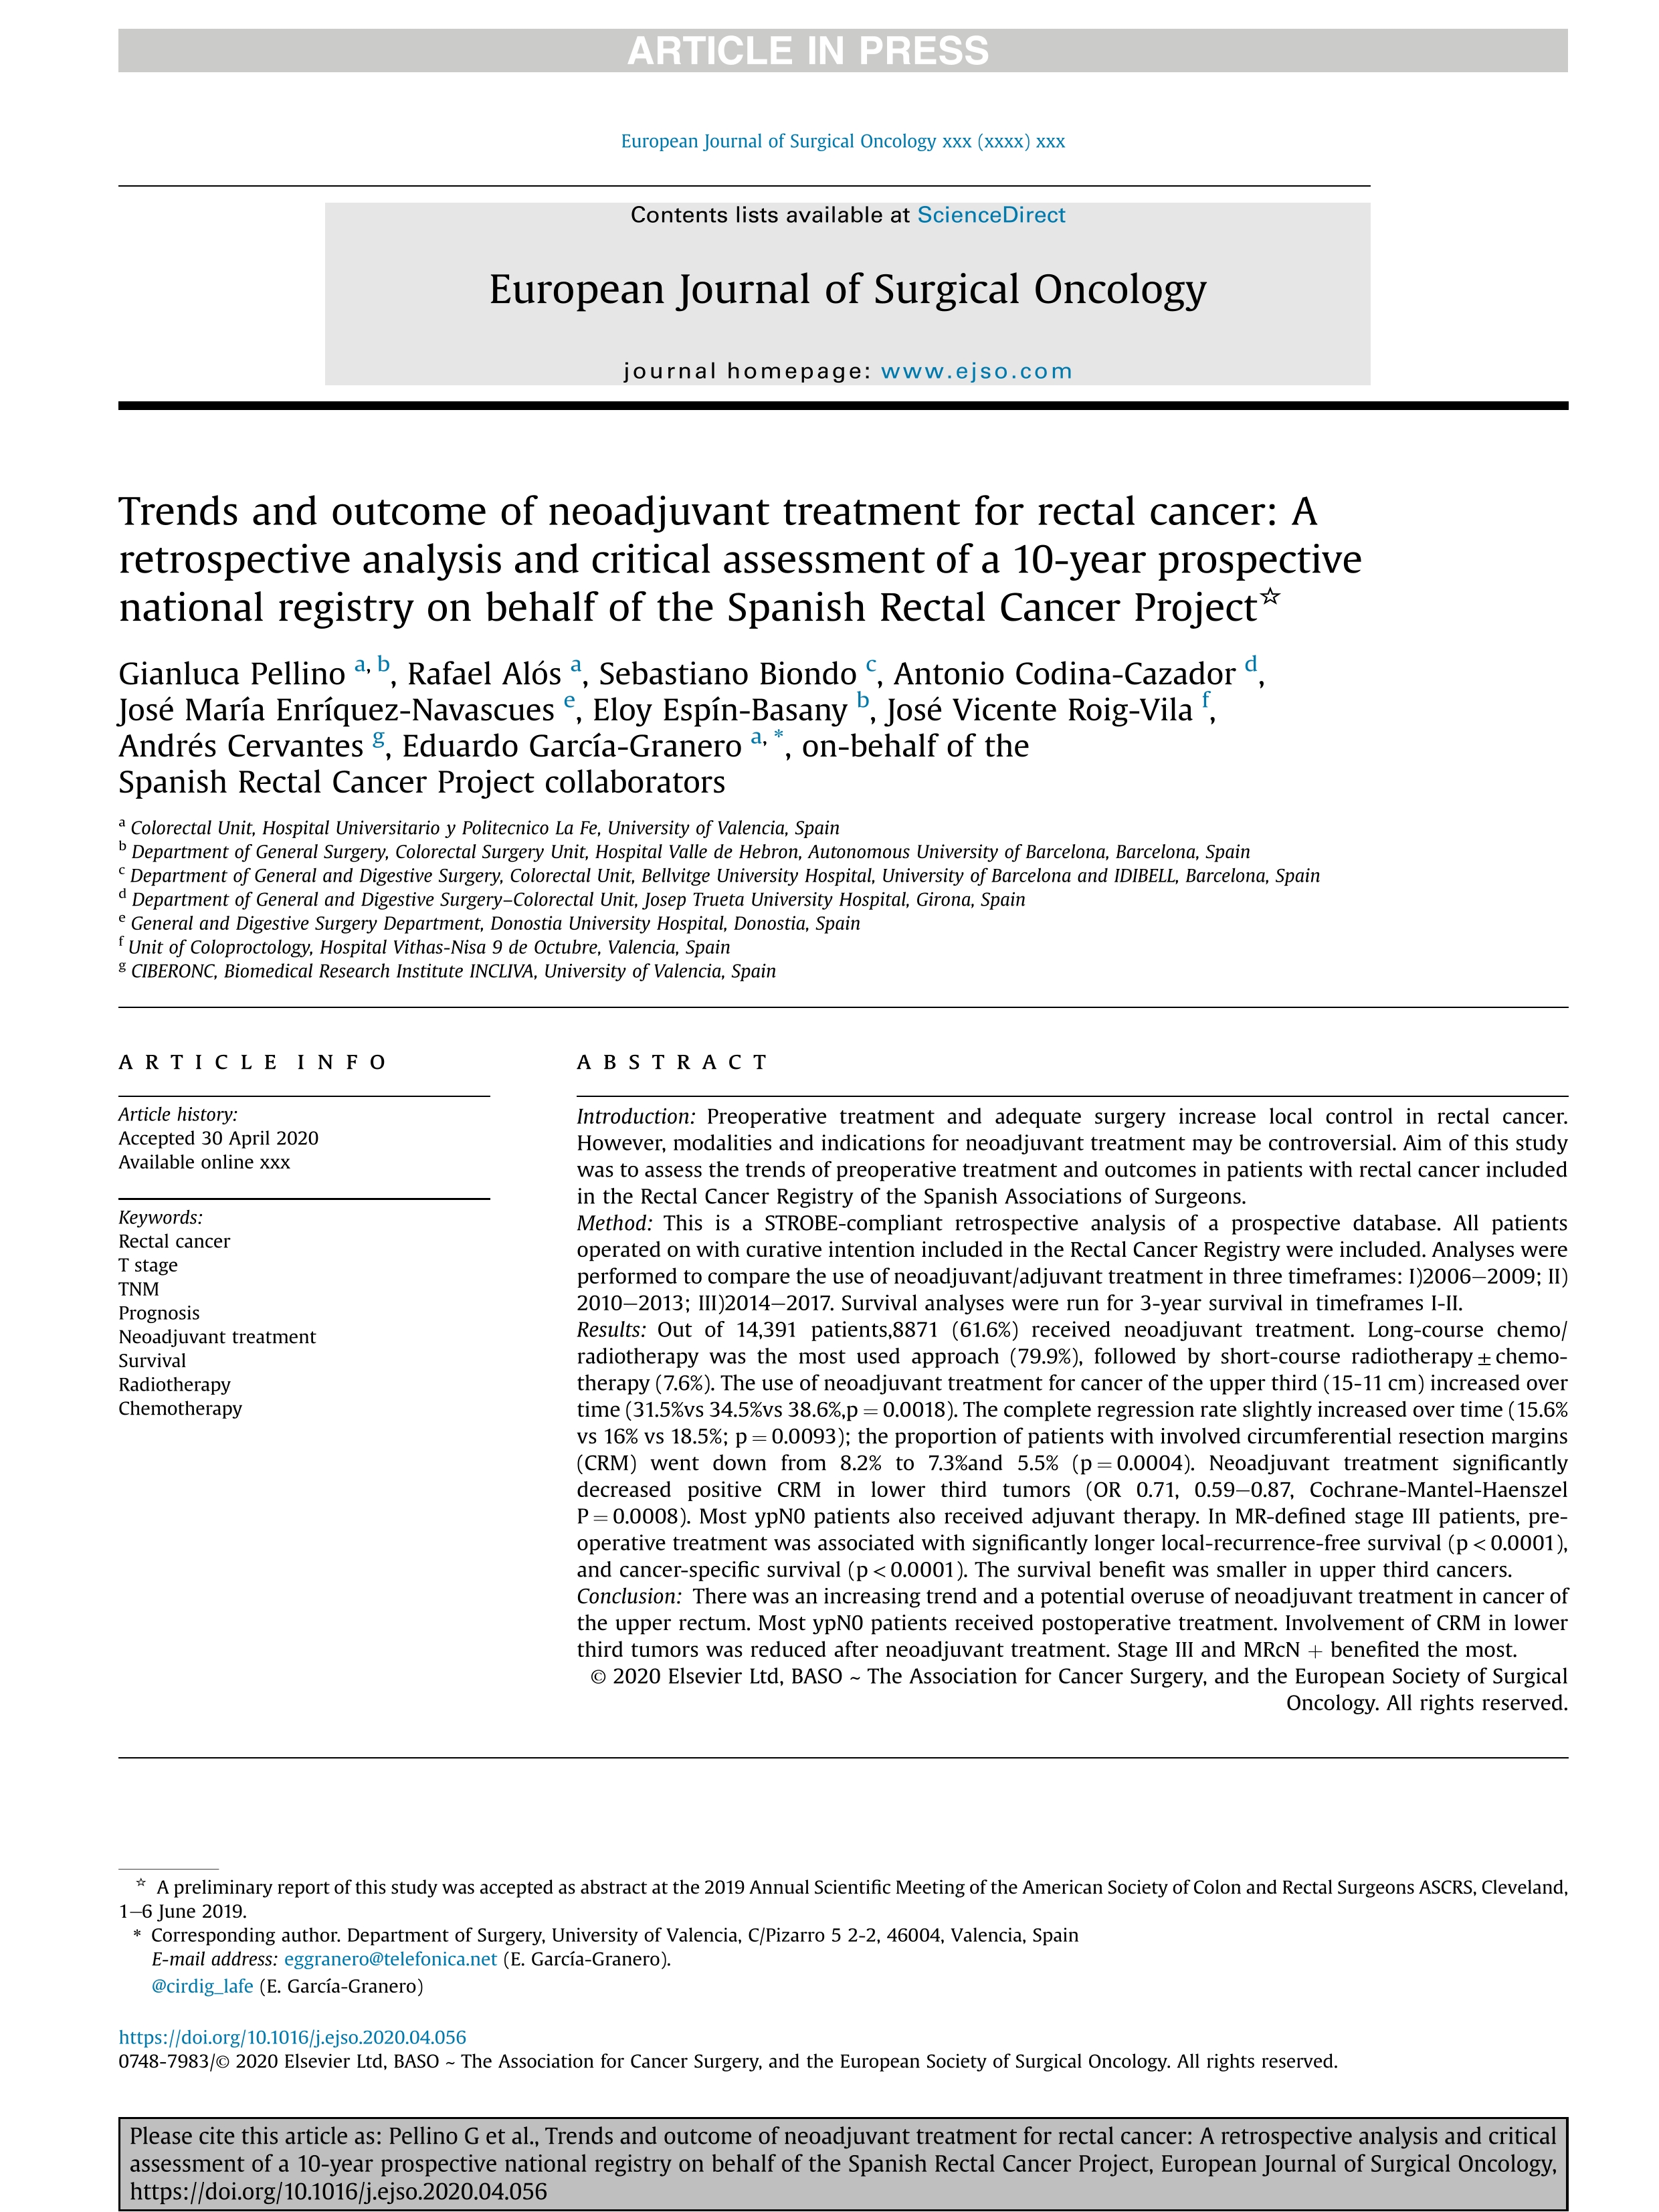 Trends and outcome of neoadjuvant treatment for rectal cancer: A retrospective analysis and critical assessment of a 10-year prospective national registry on behalf of the Spanish Rectal Cancer Project